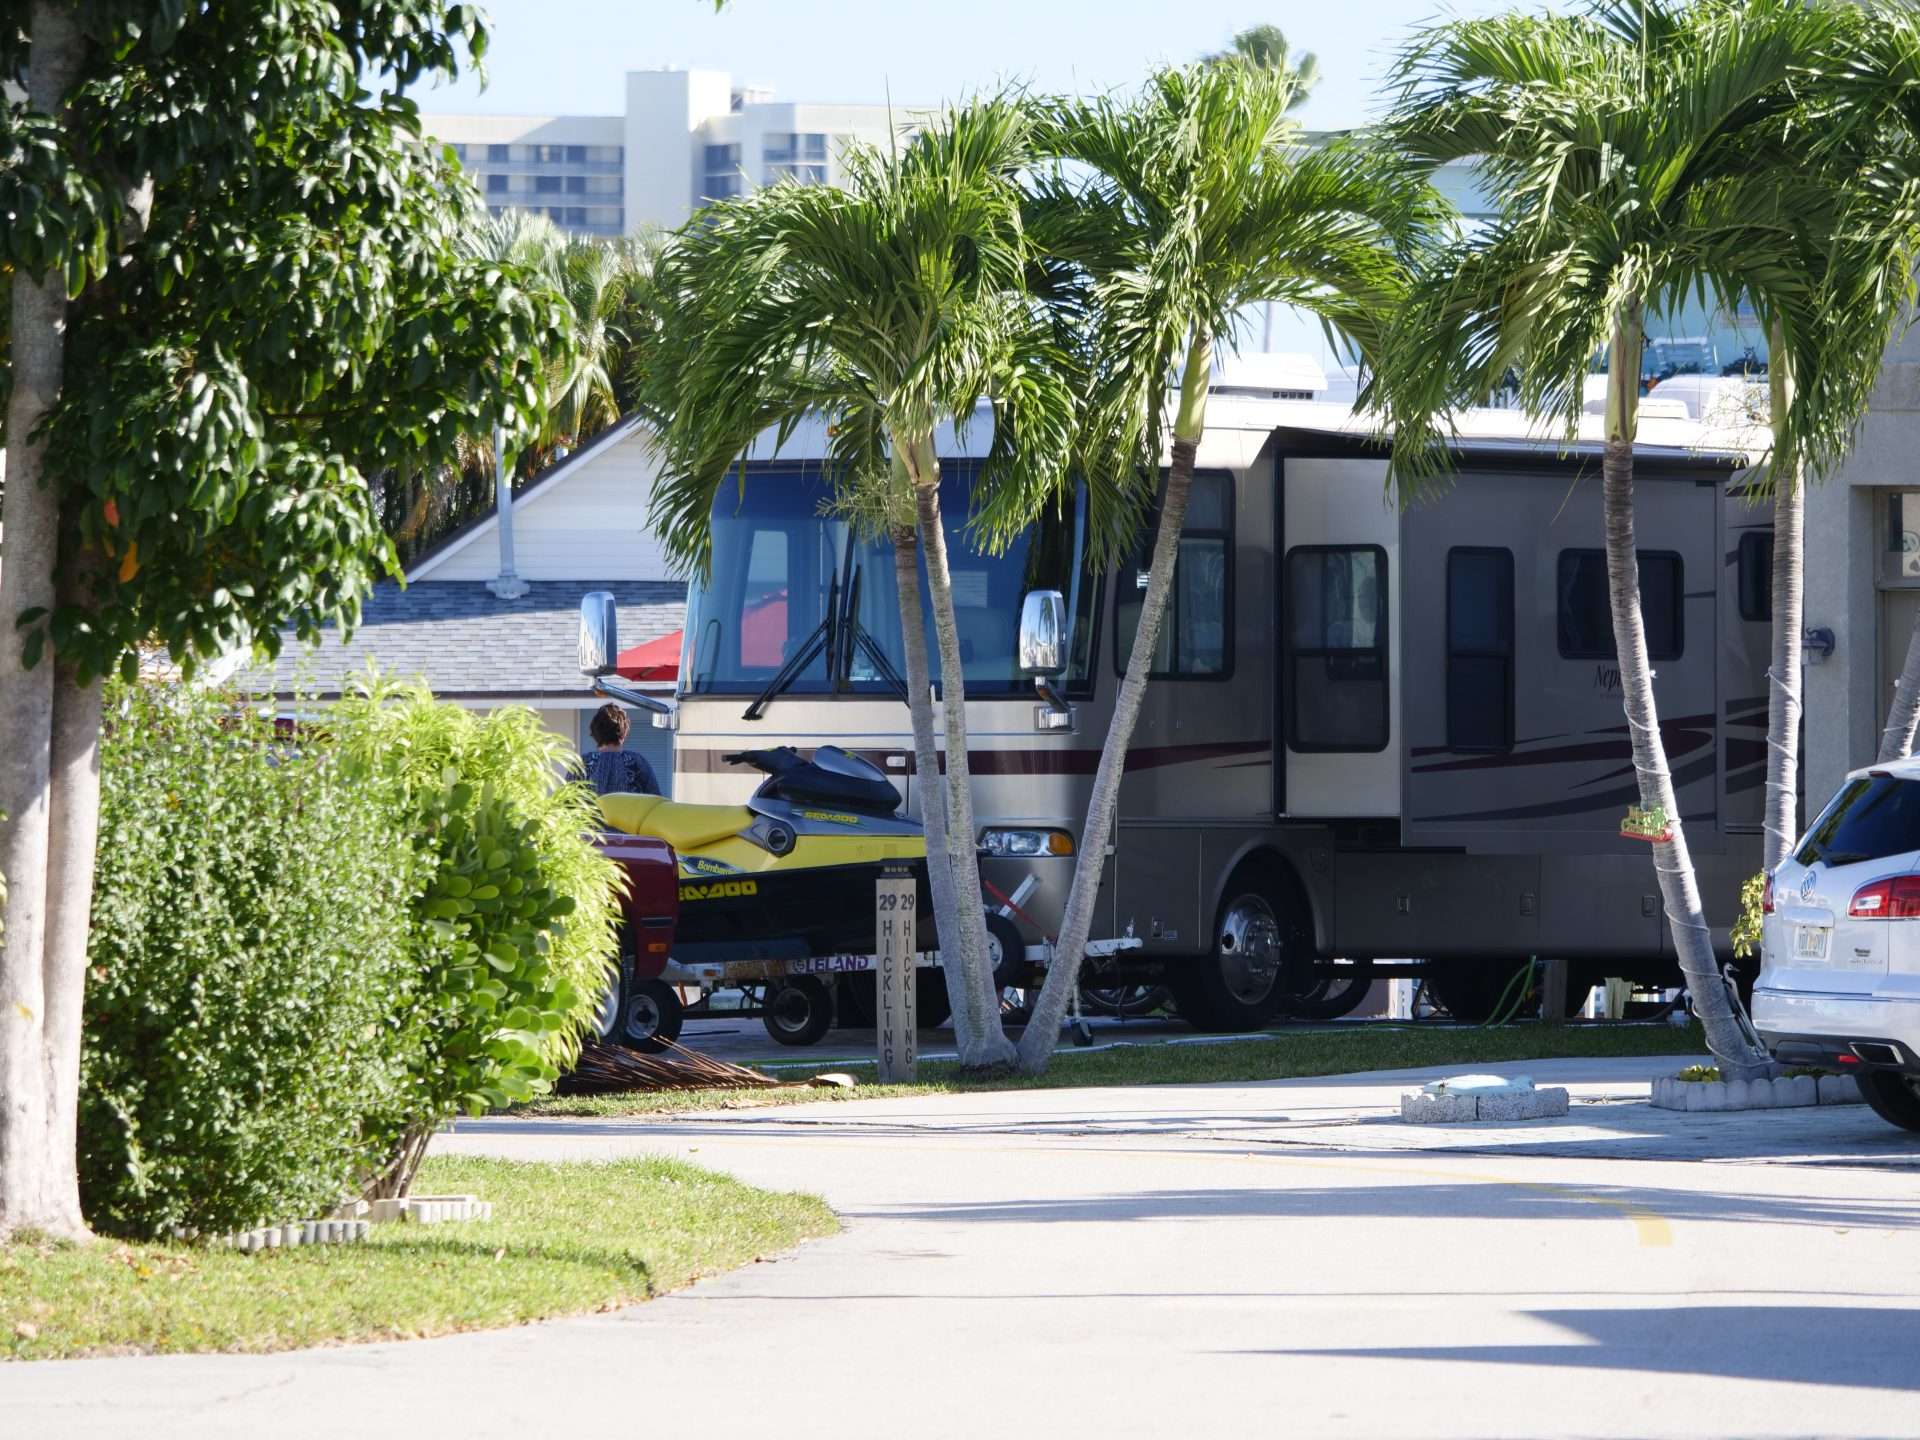 RVs parked by palm trees in Florida RV park